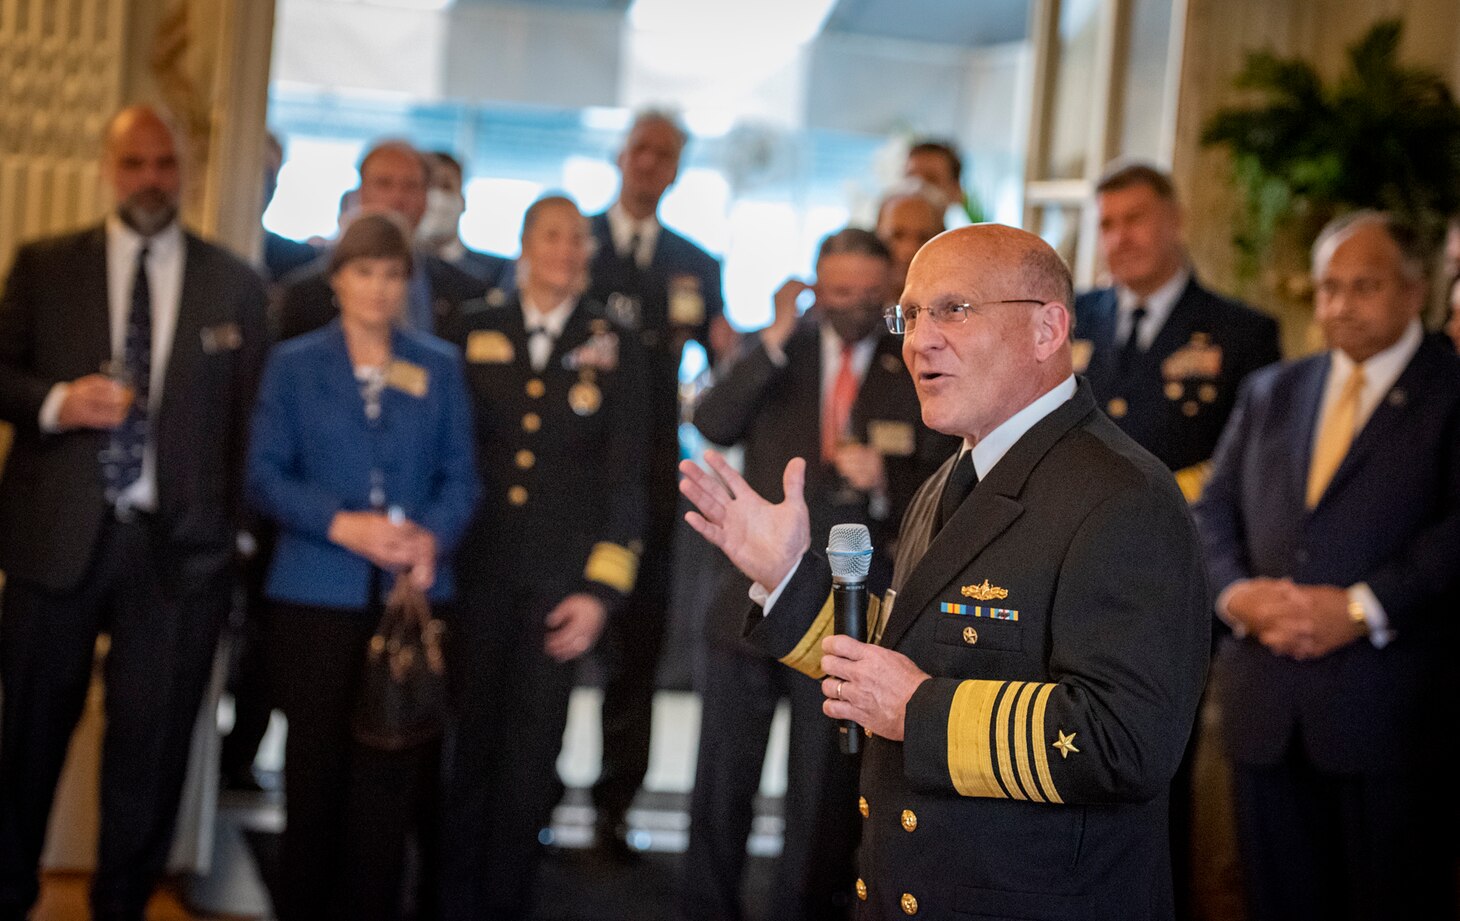 Chief of Naval Operations (CNO) Adm. Mike Gilday speaks with international delegates during the International Seapower Symposium welcome reception.